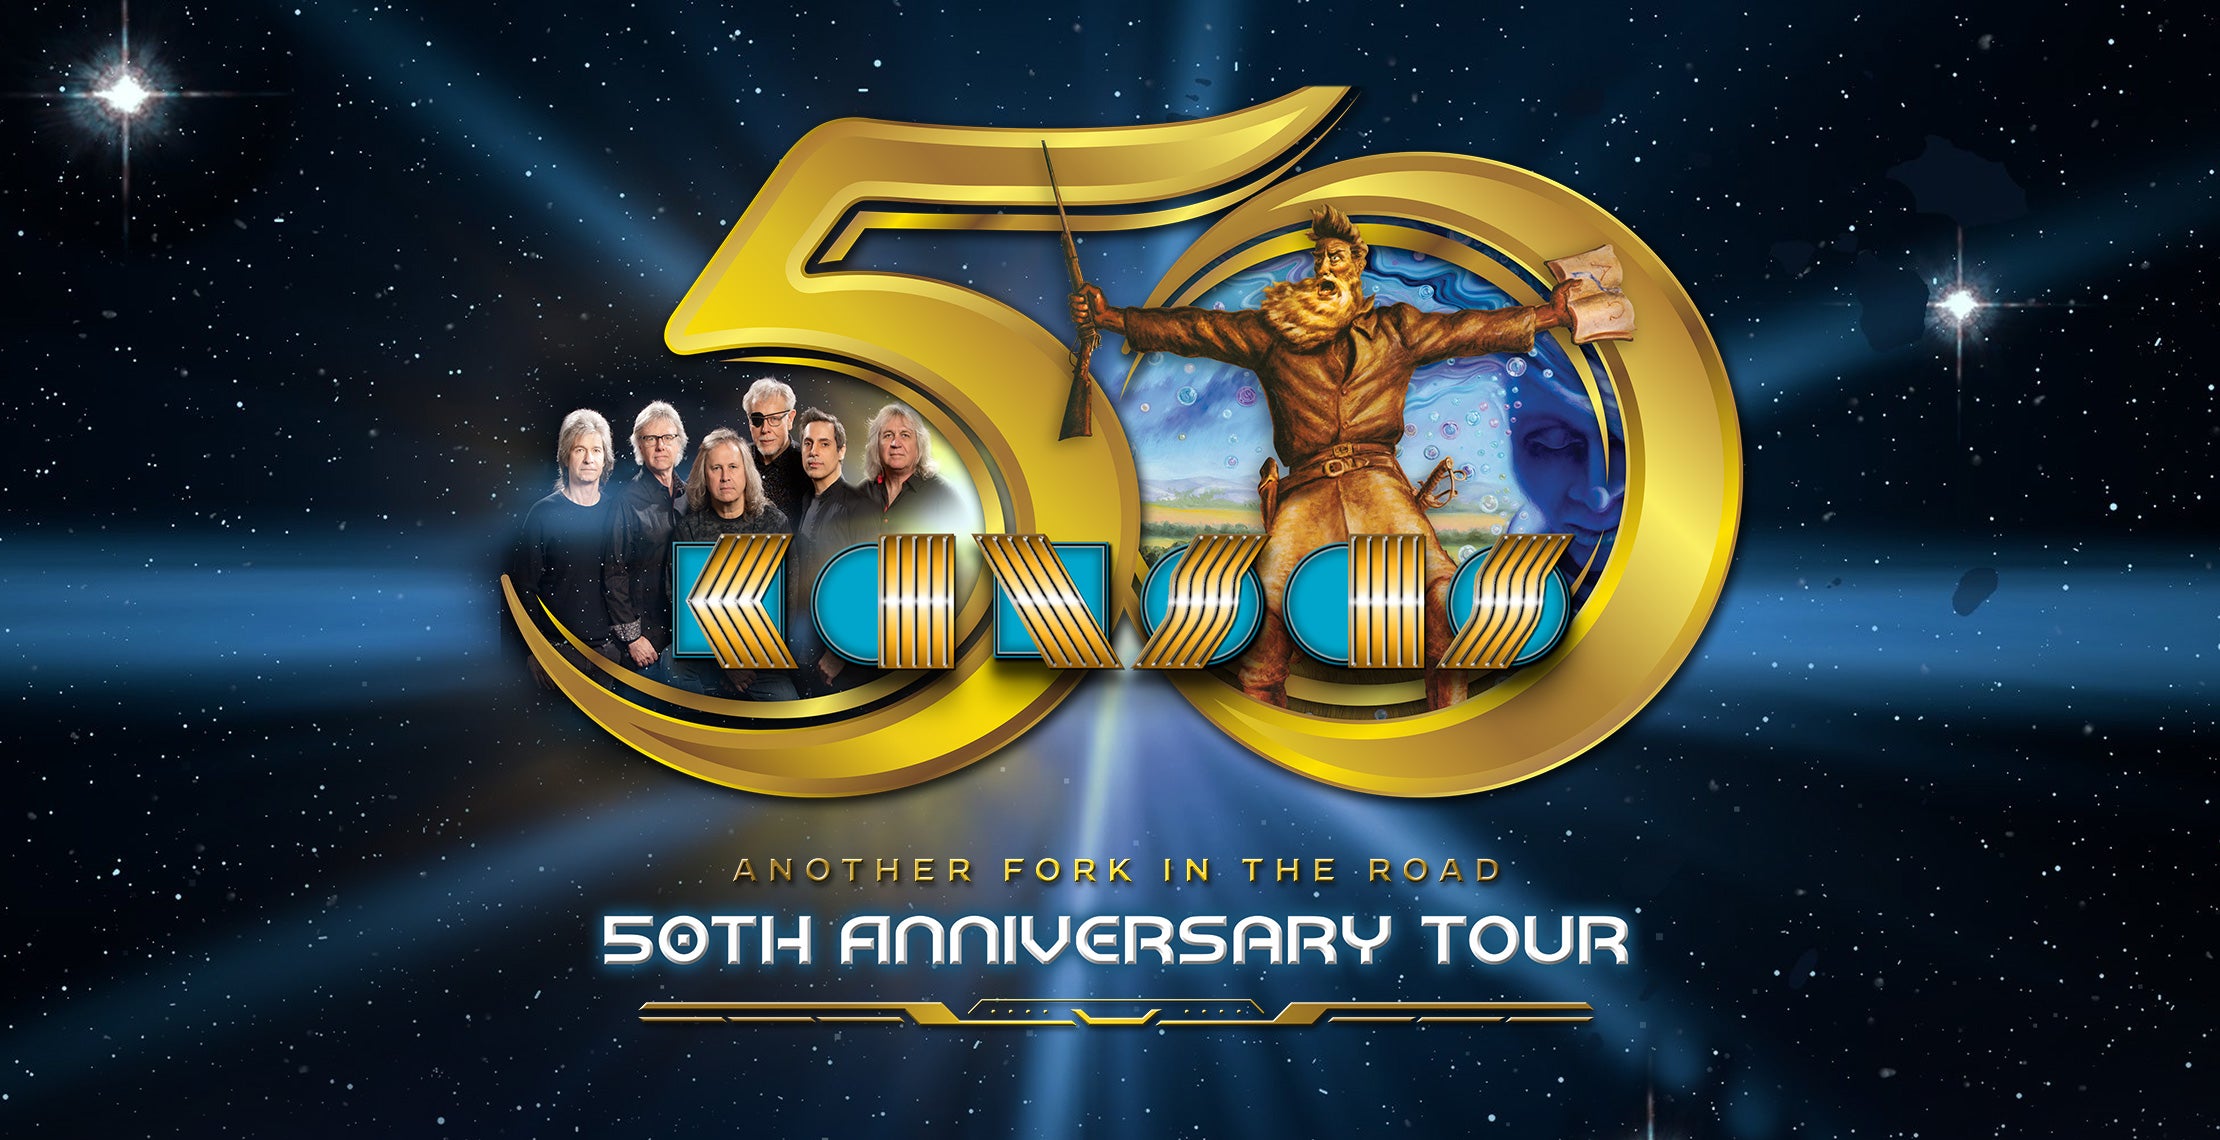 Kansas:  Another Fork in the Road - 50th Anniversary Tour